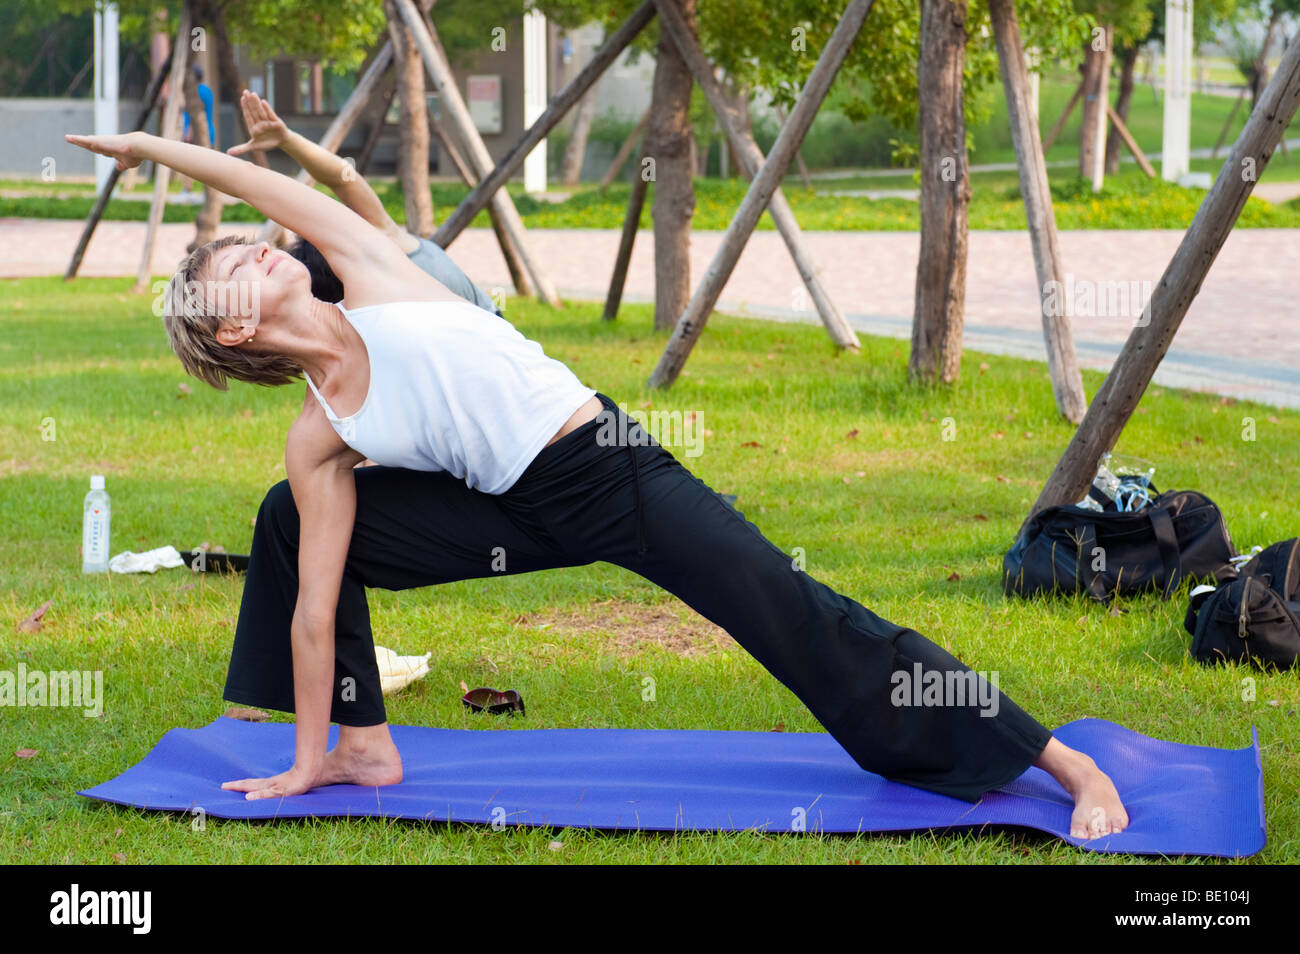 Woman Stretching Doing Yoga Outdoors In Park Stock Photo